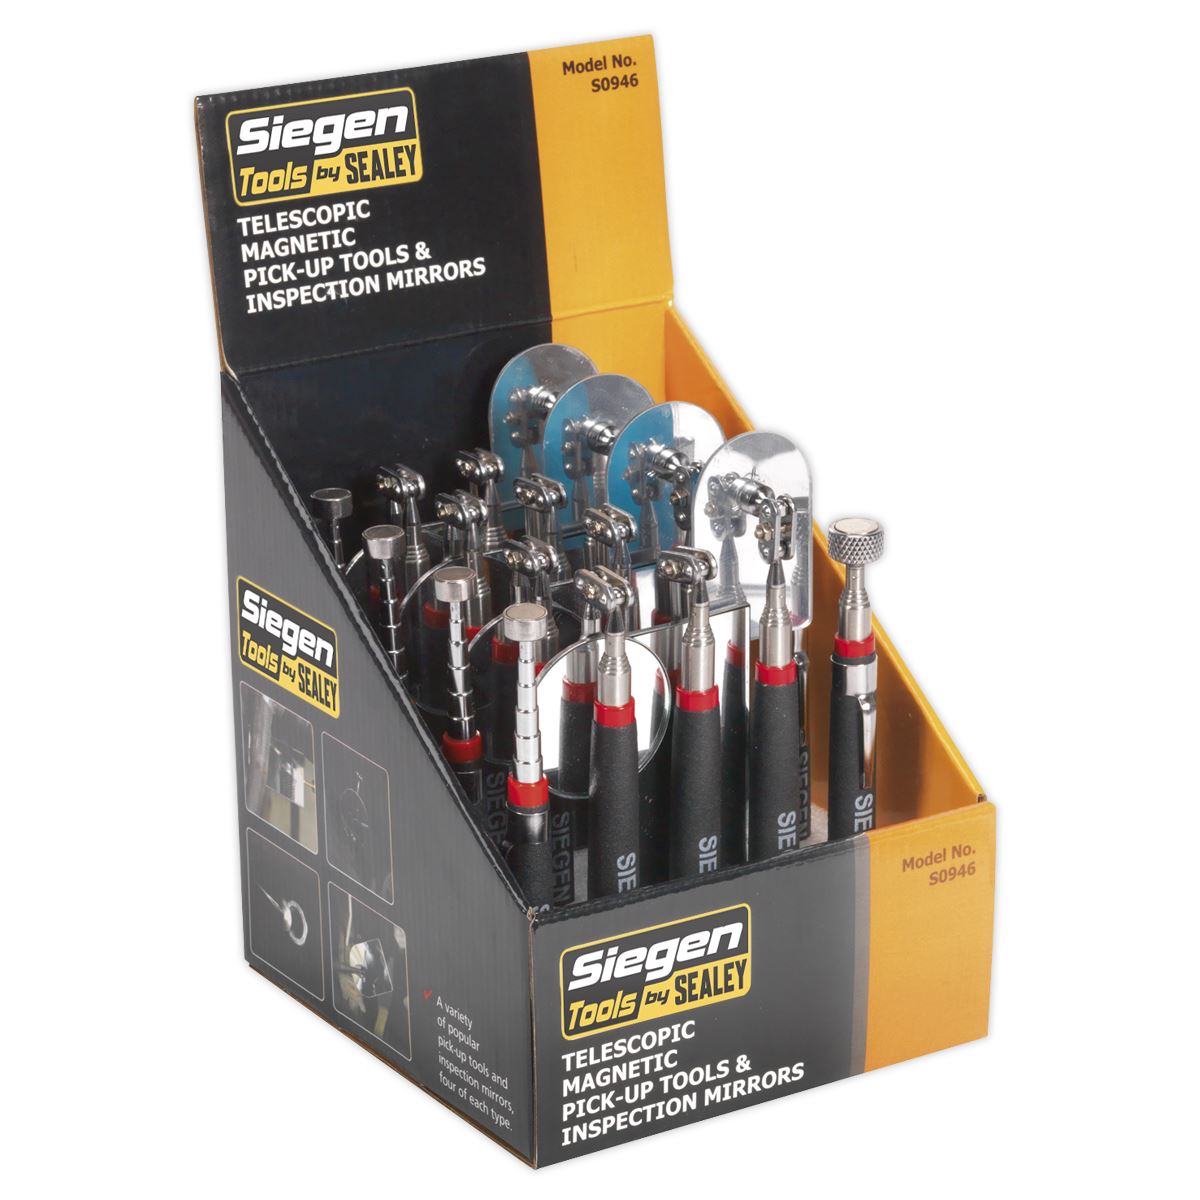 Siegen by Sealey Telescopic Magnetic Pick-Up Tools & Inspection Mirrors - Display Box of 20